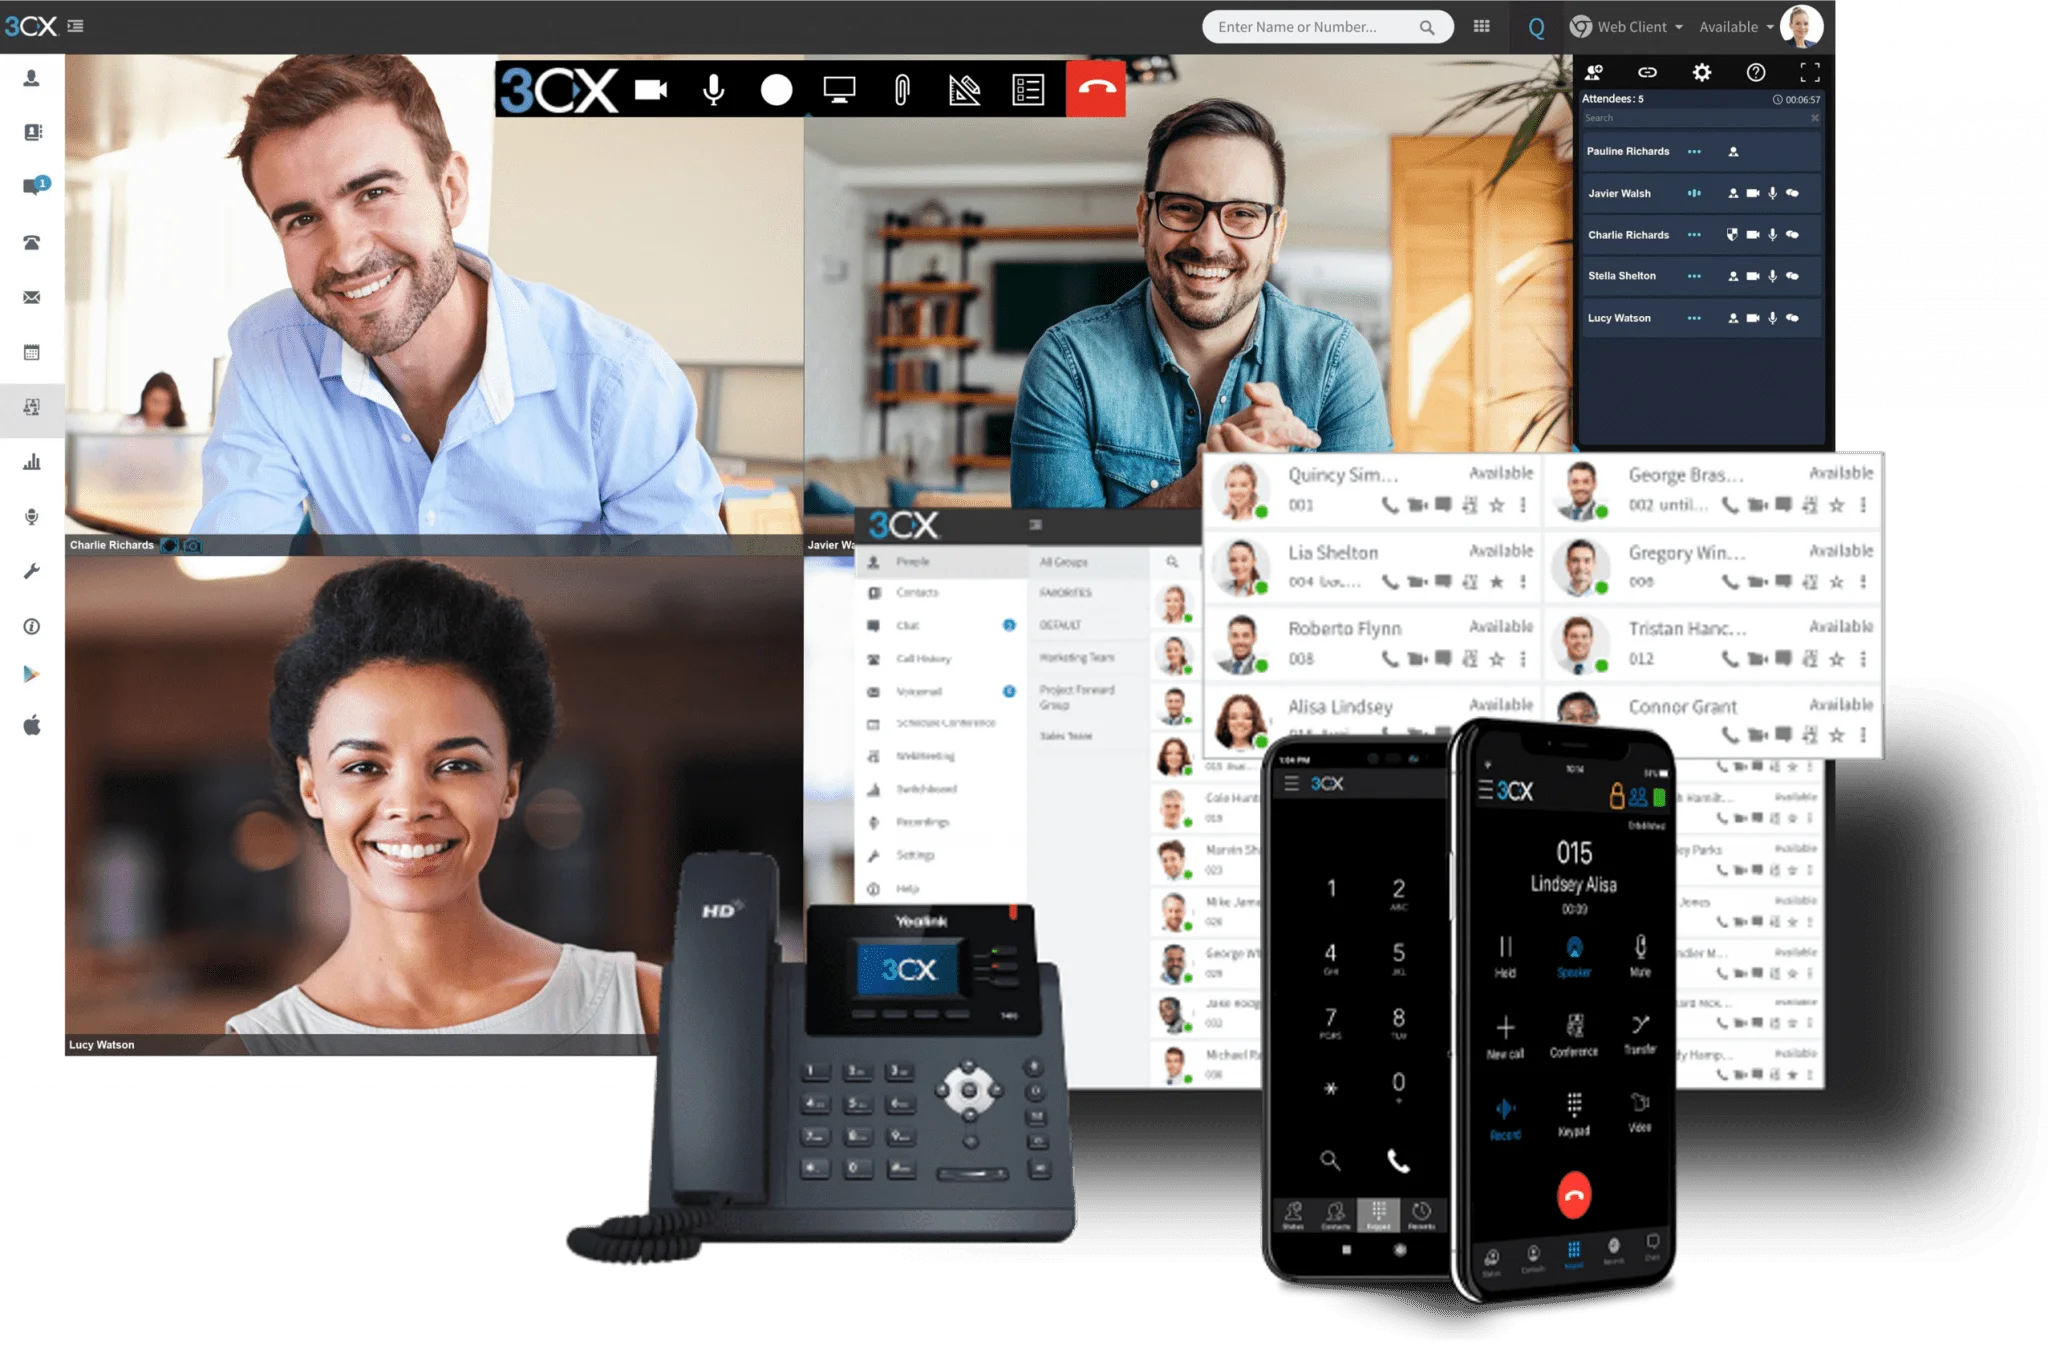 3CX VoIP Phone System